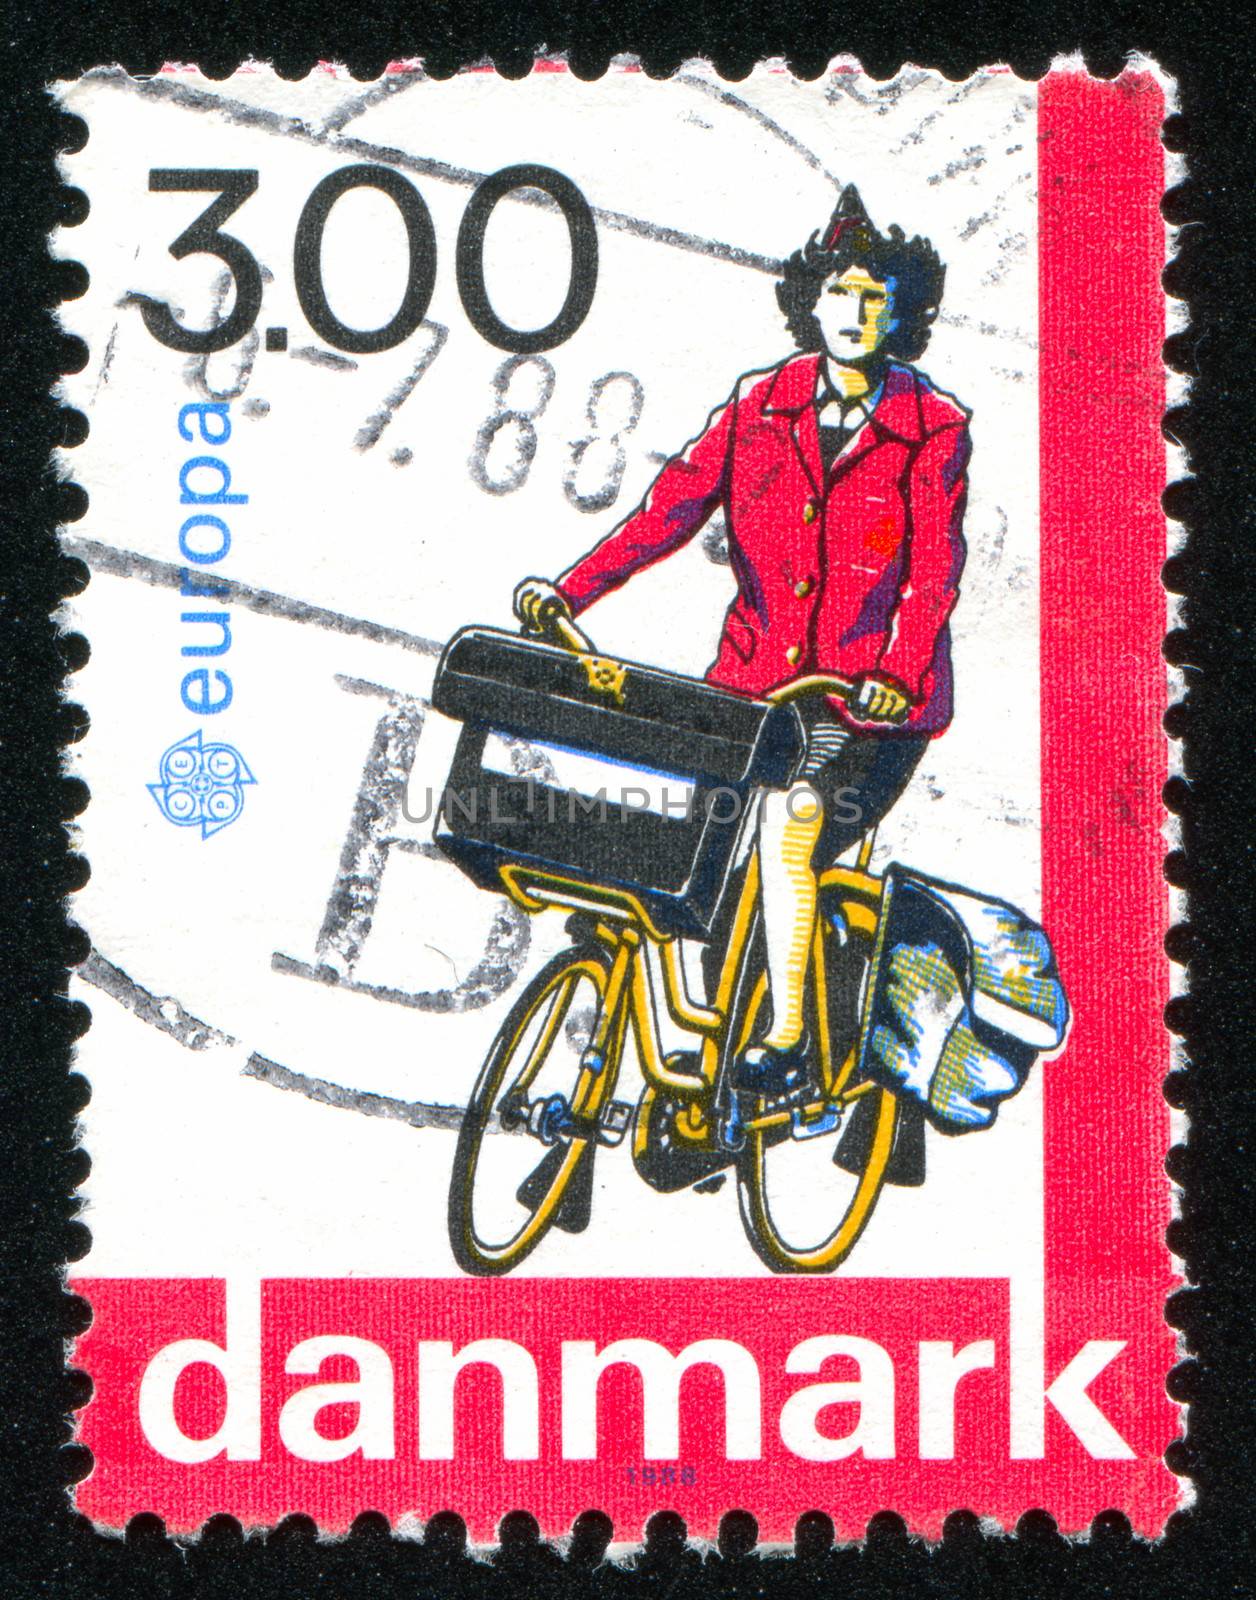 Postwoman on bicycle by rook